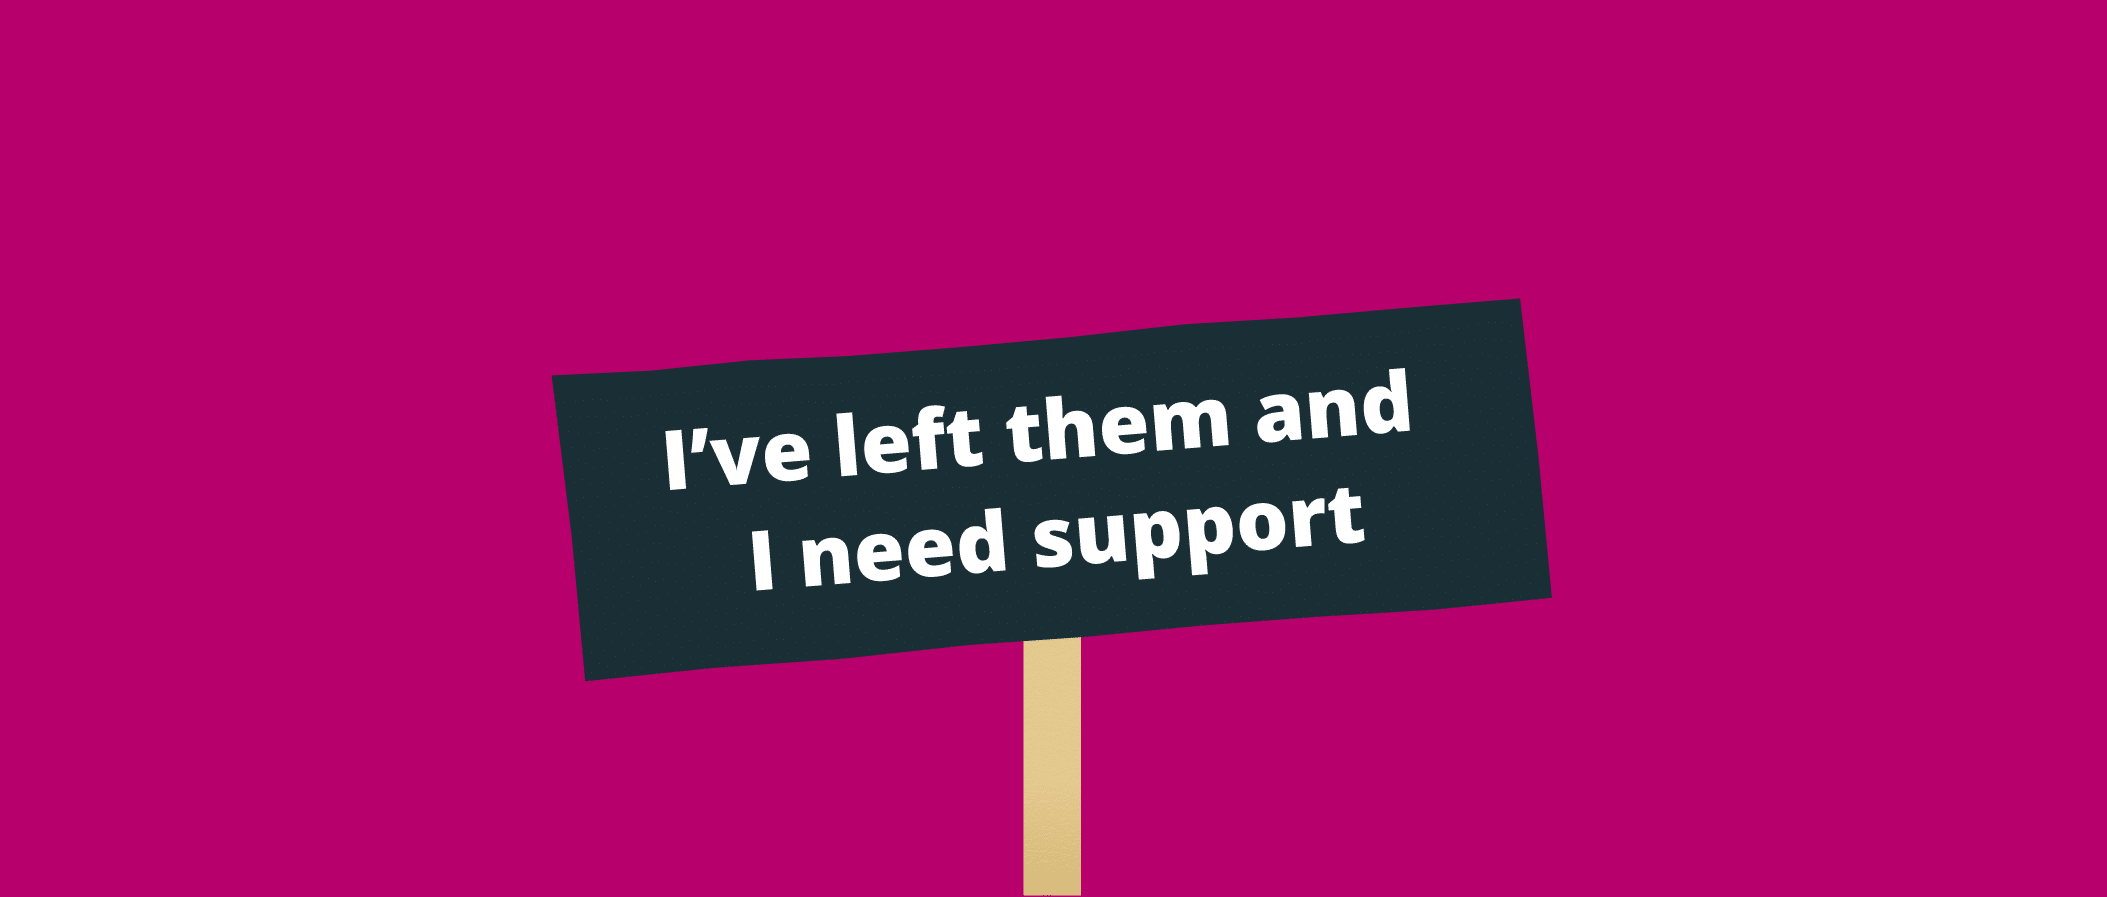 I've-left-them-and-I-need-support